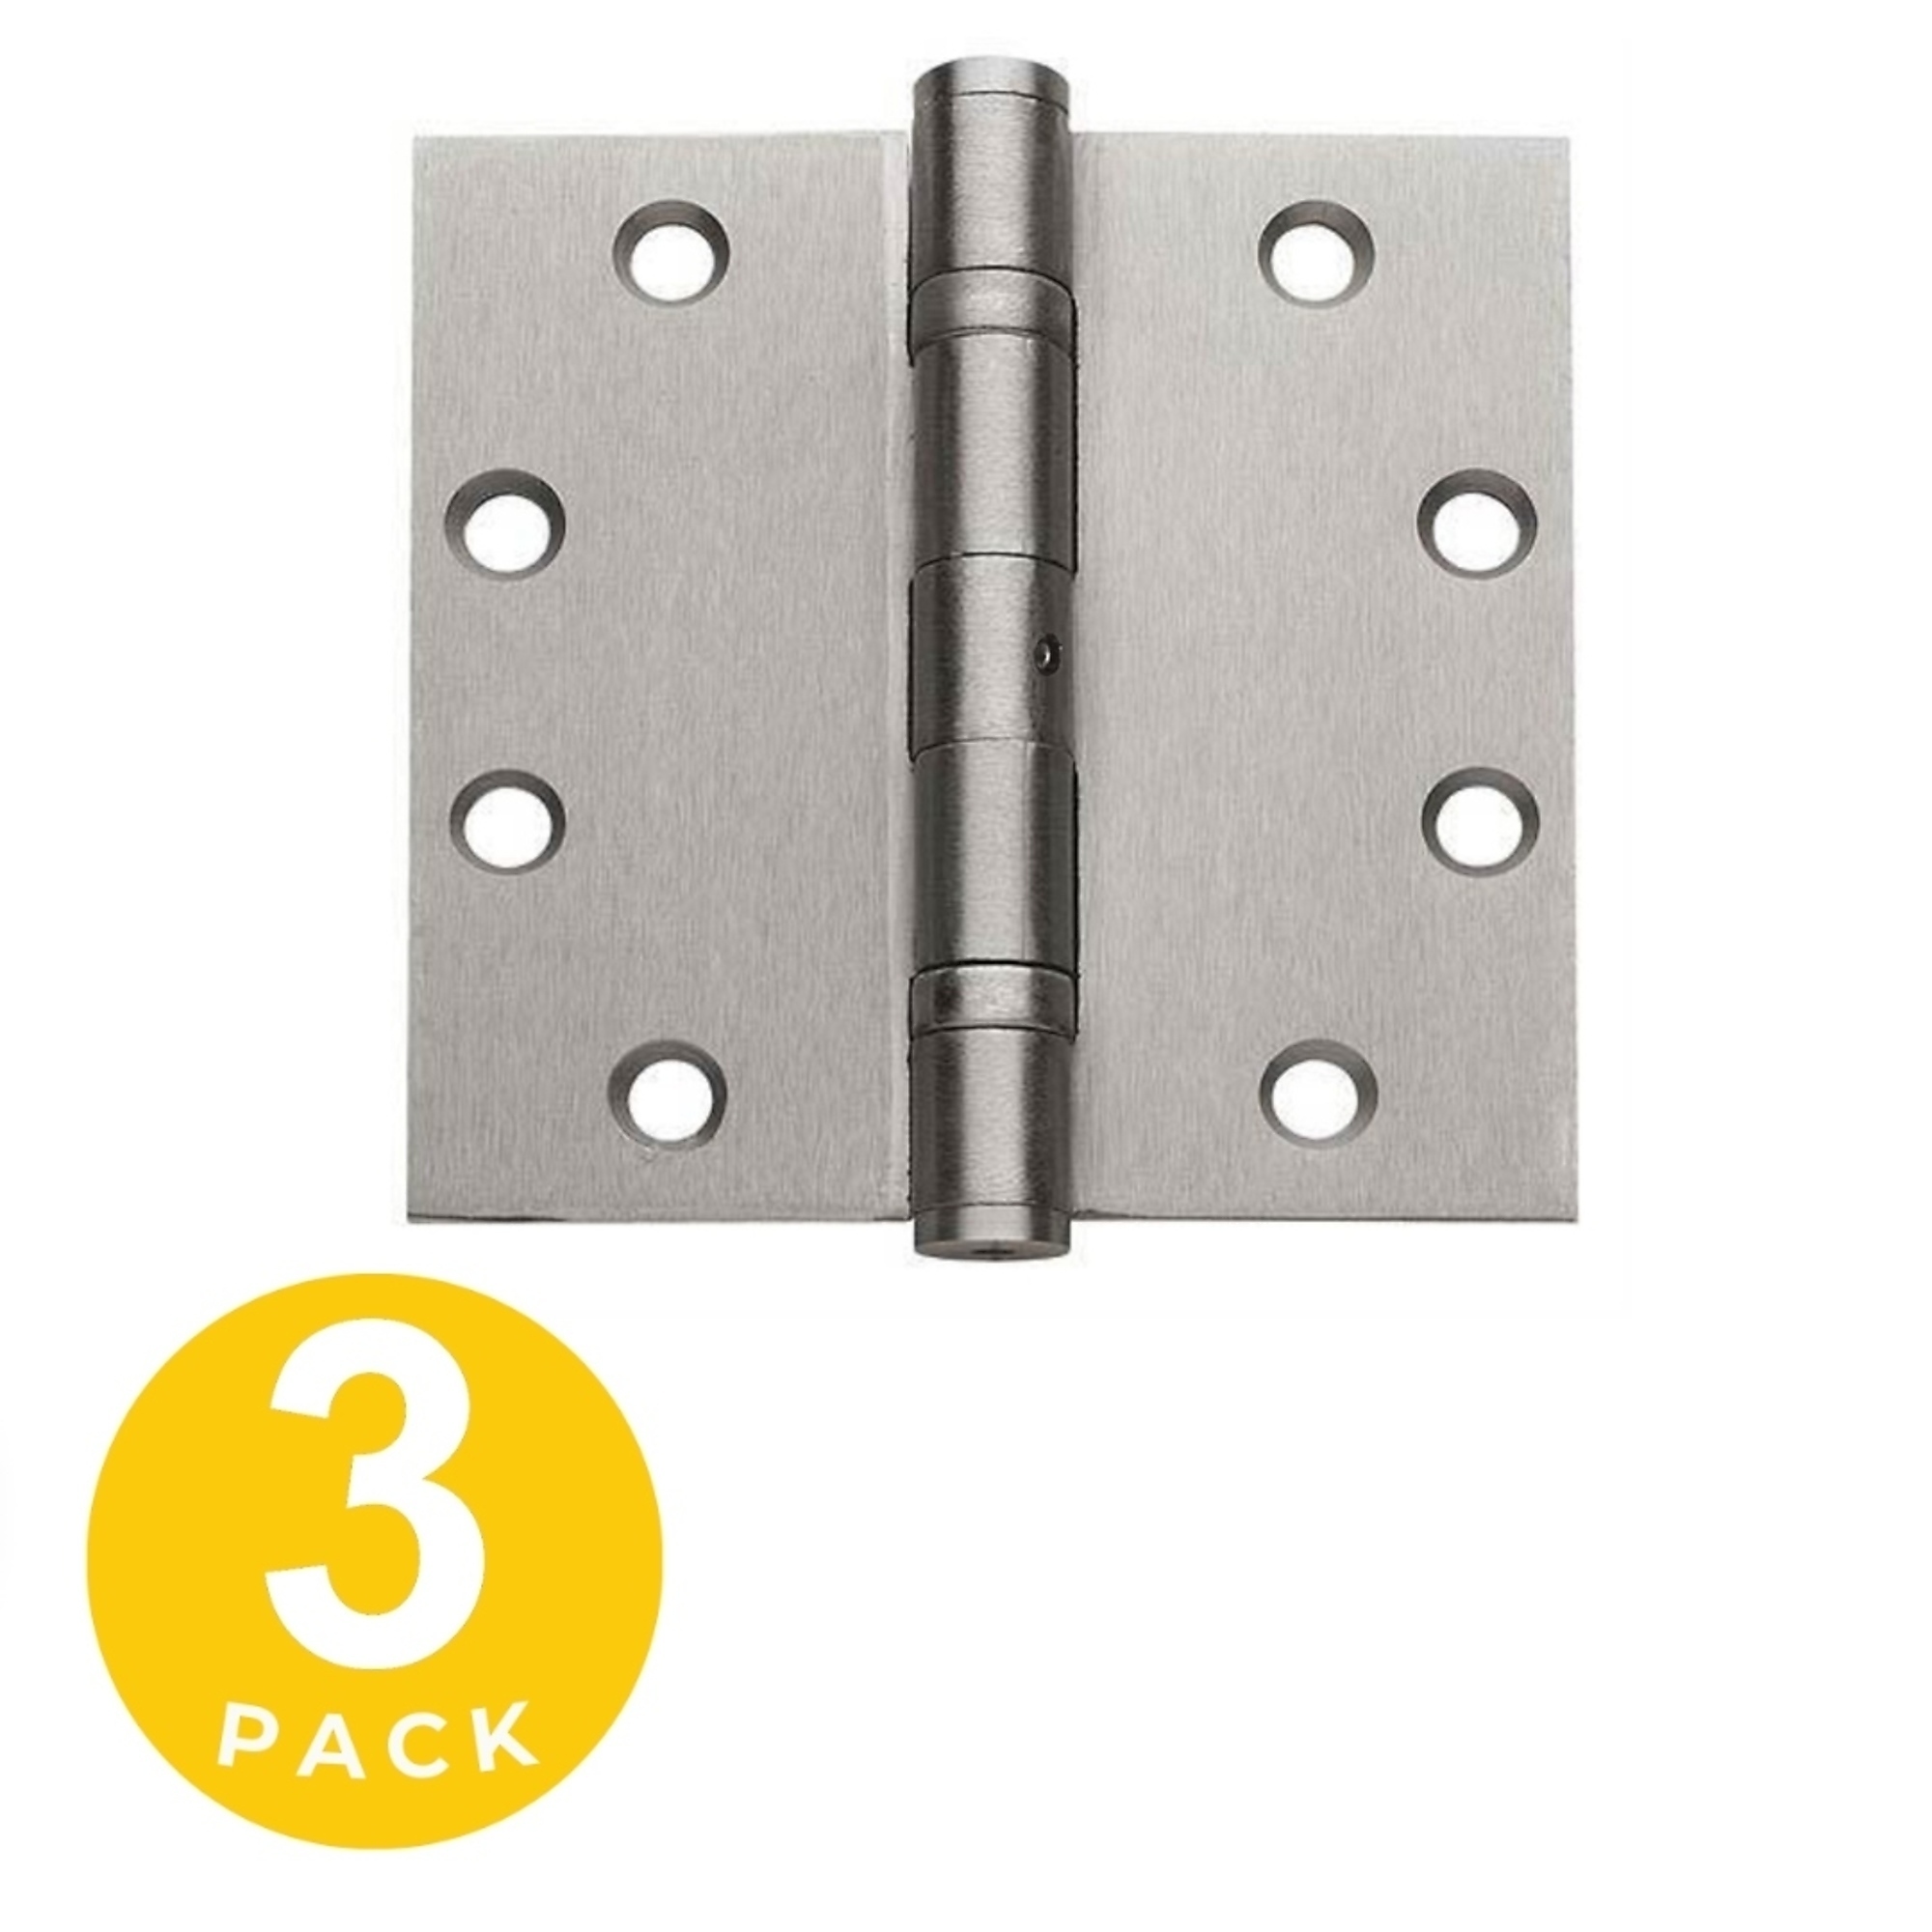 Global Door Controls, 4.5Inch x 4.5Inch Mortise Squared Hinge - Set of 3 Model CP4545BBNRP-26D-3